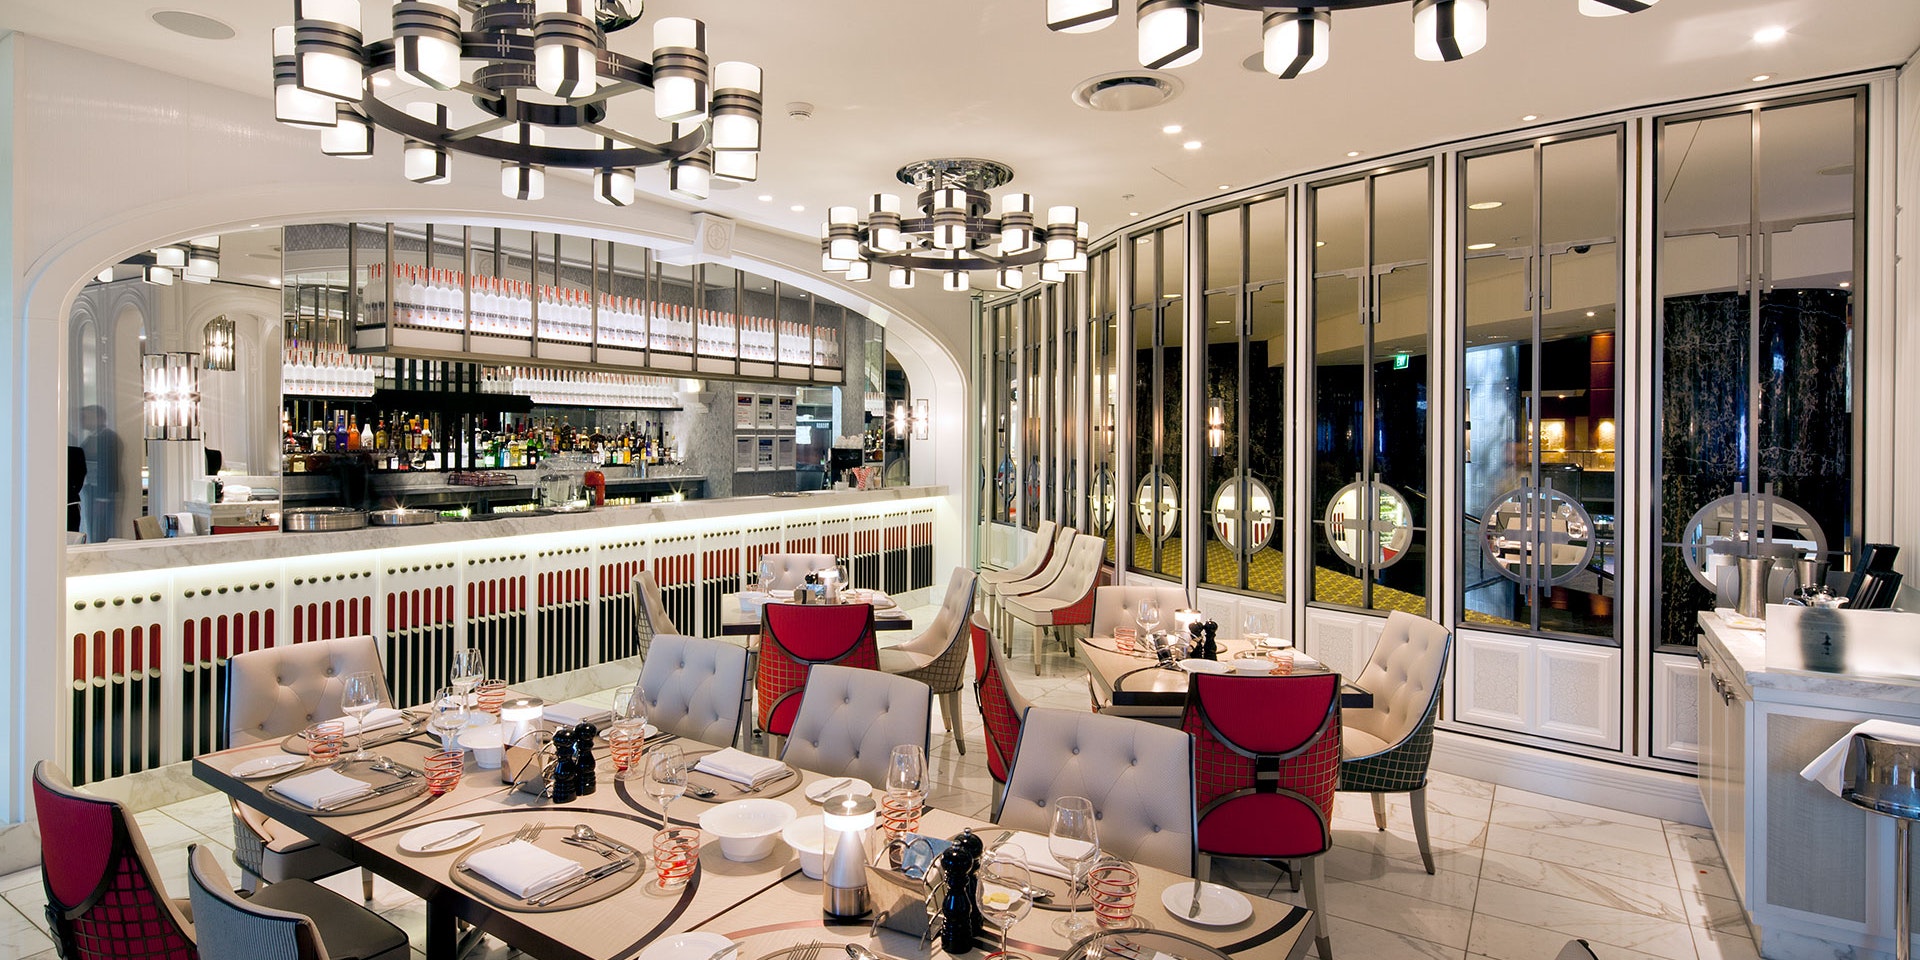 Slim LED strip in application, installed in the Conservatory Brasserie in Melbourne. Primo X2 with an IP68 rating was also IP rated used in the food display which made it possible to submerse the installation inside the ice trough.